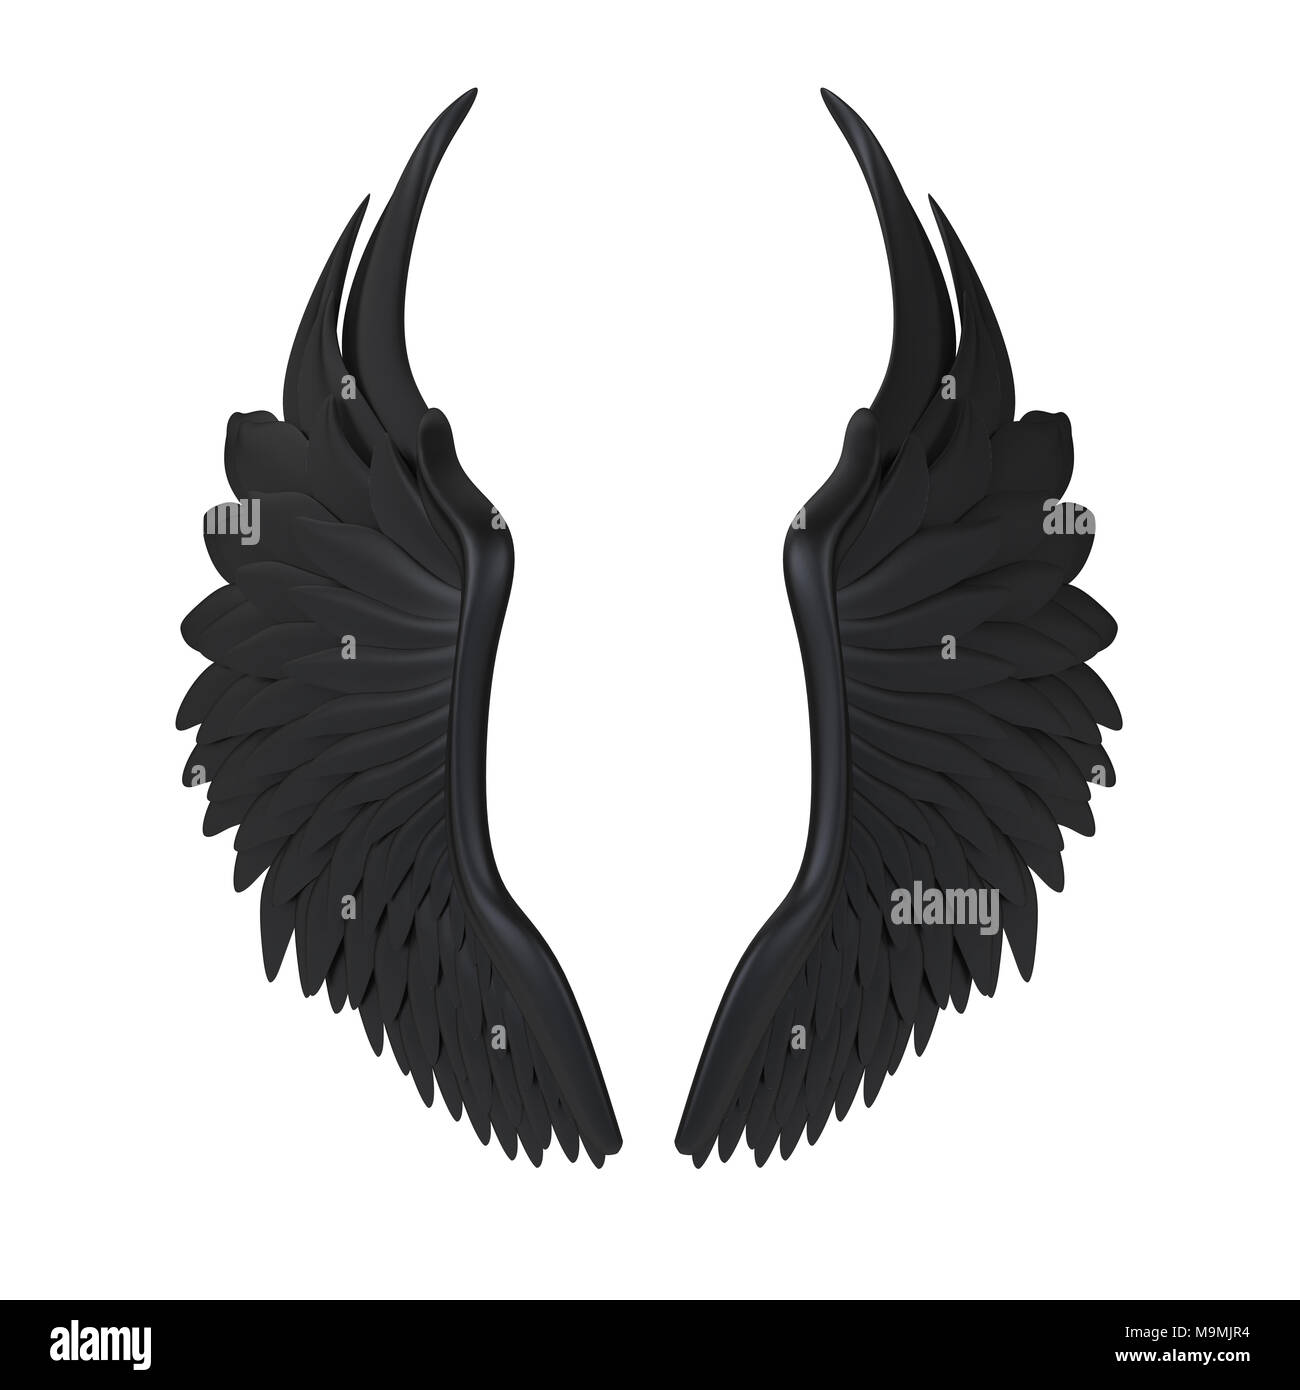 Demon Wings Black Wing Plumage Isolated On White Background Stock Photo -  Download Image Now - iStock